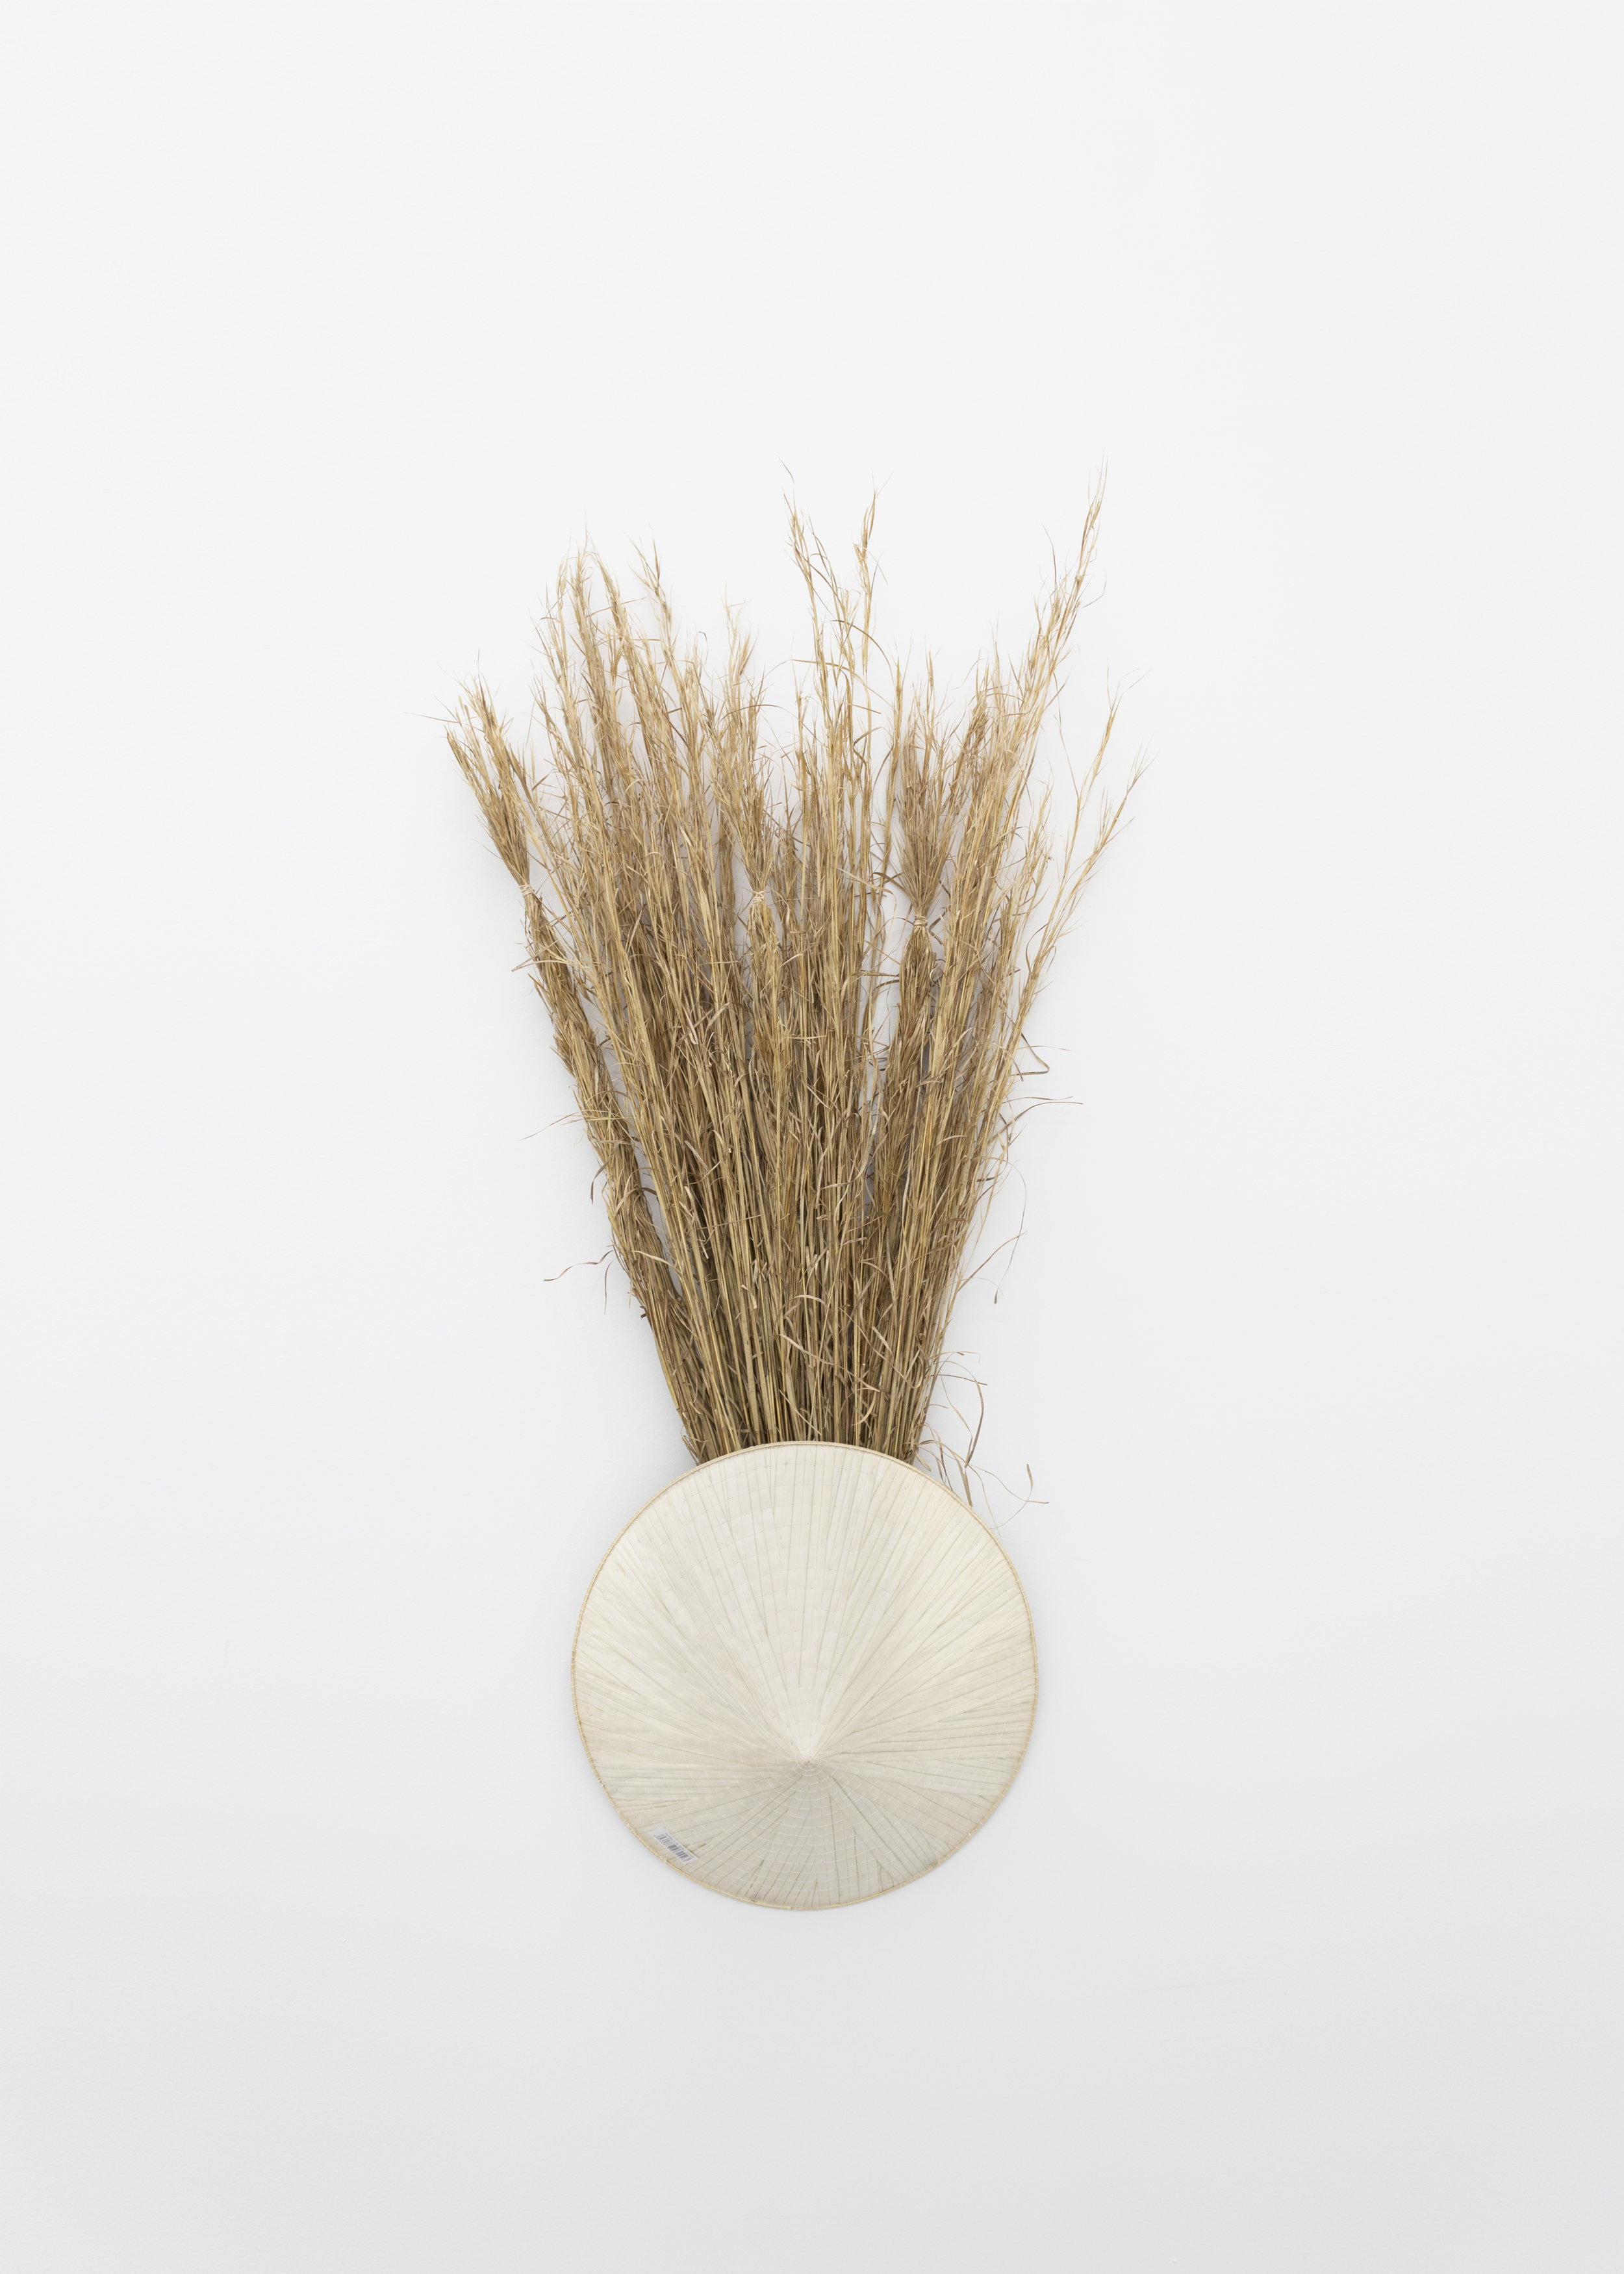  Millian Giang Lien Pham,  Preforge: 9 Stages (Three) , 2019. Grass, conical hat 